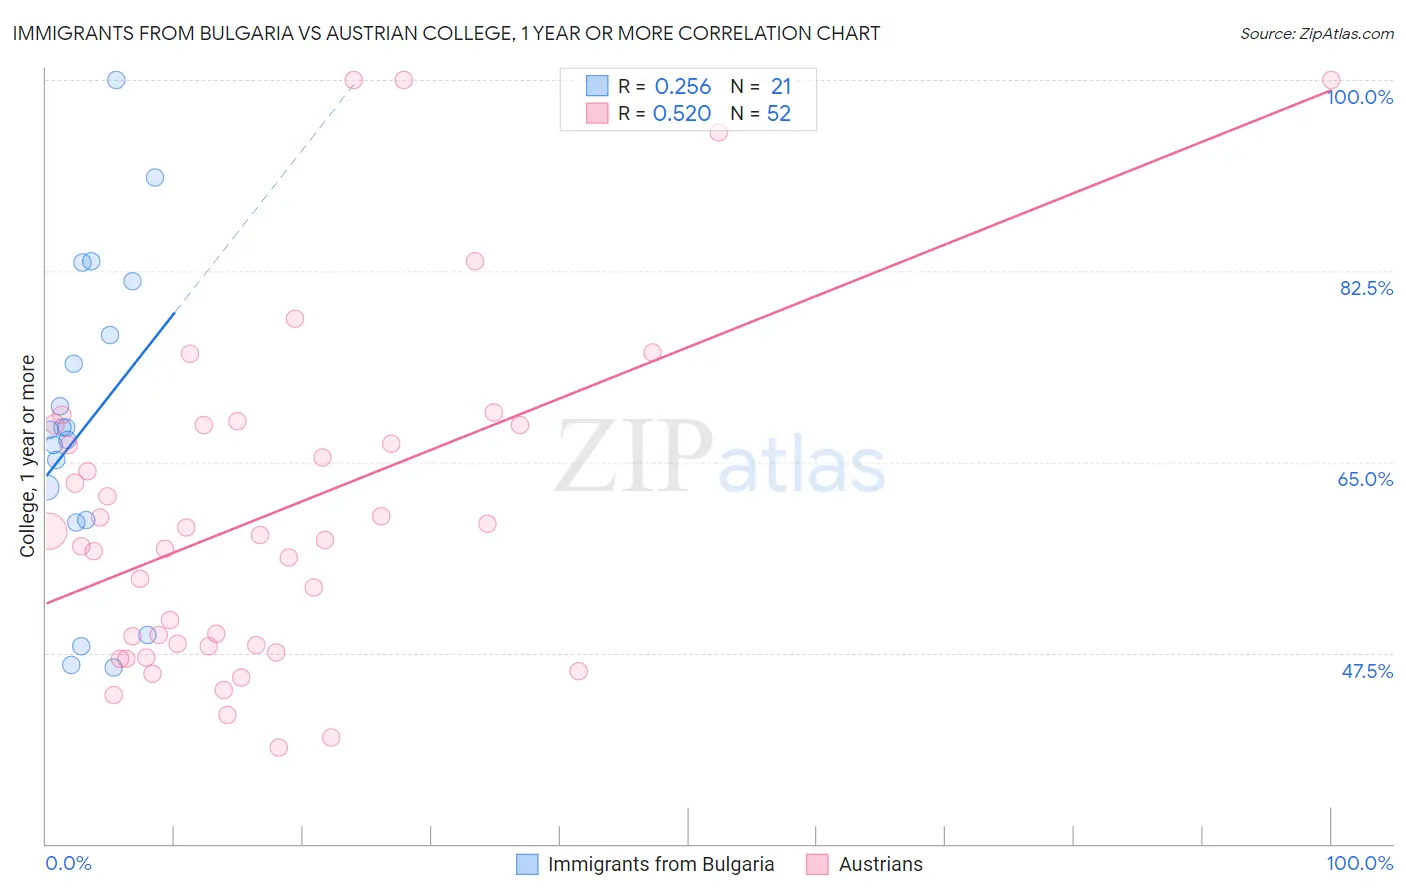 Immigrants from Bulgaria vs Austrian College, 1 year or more